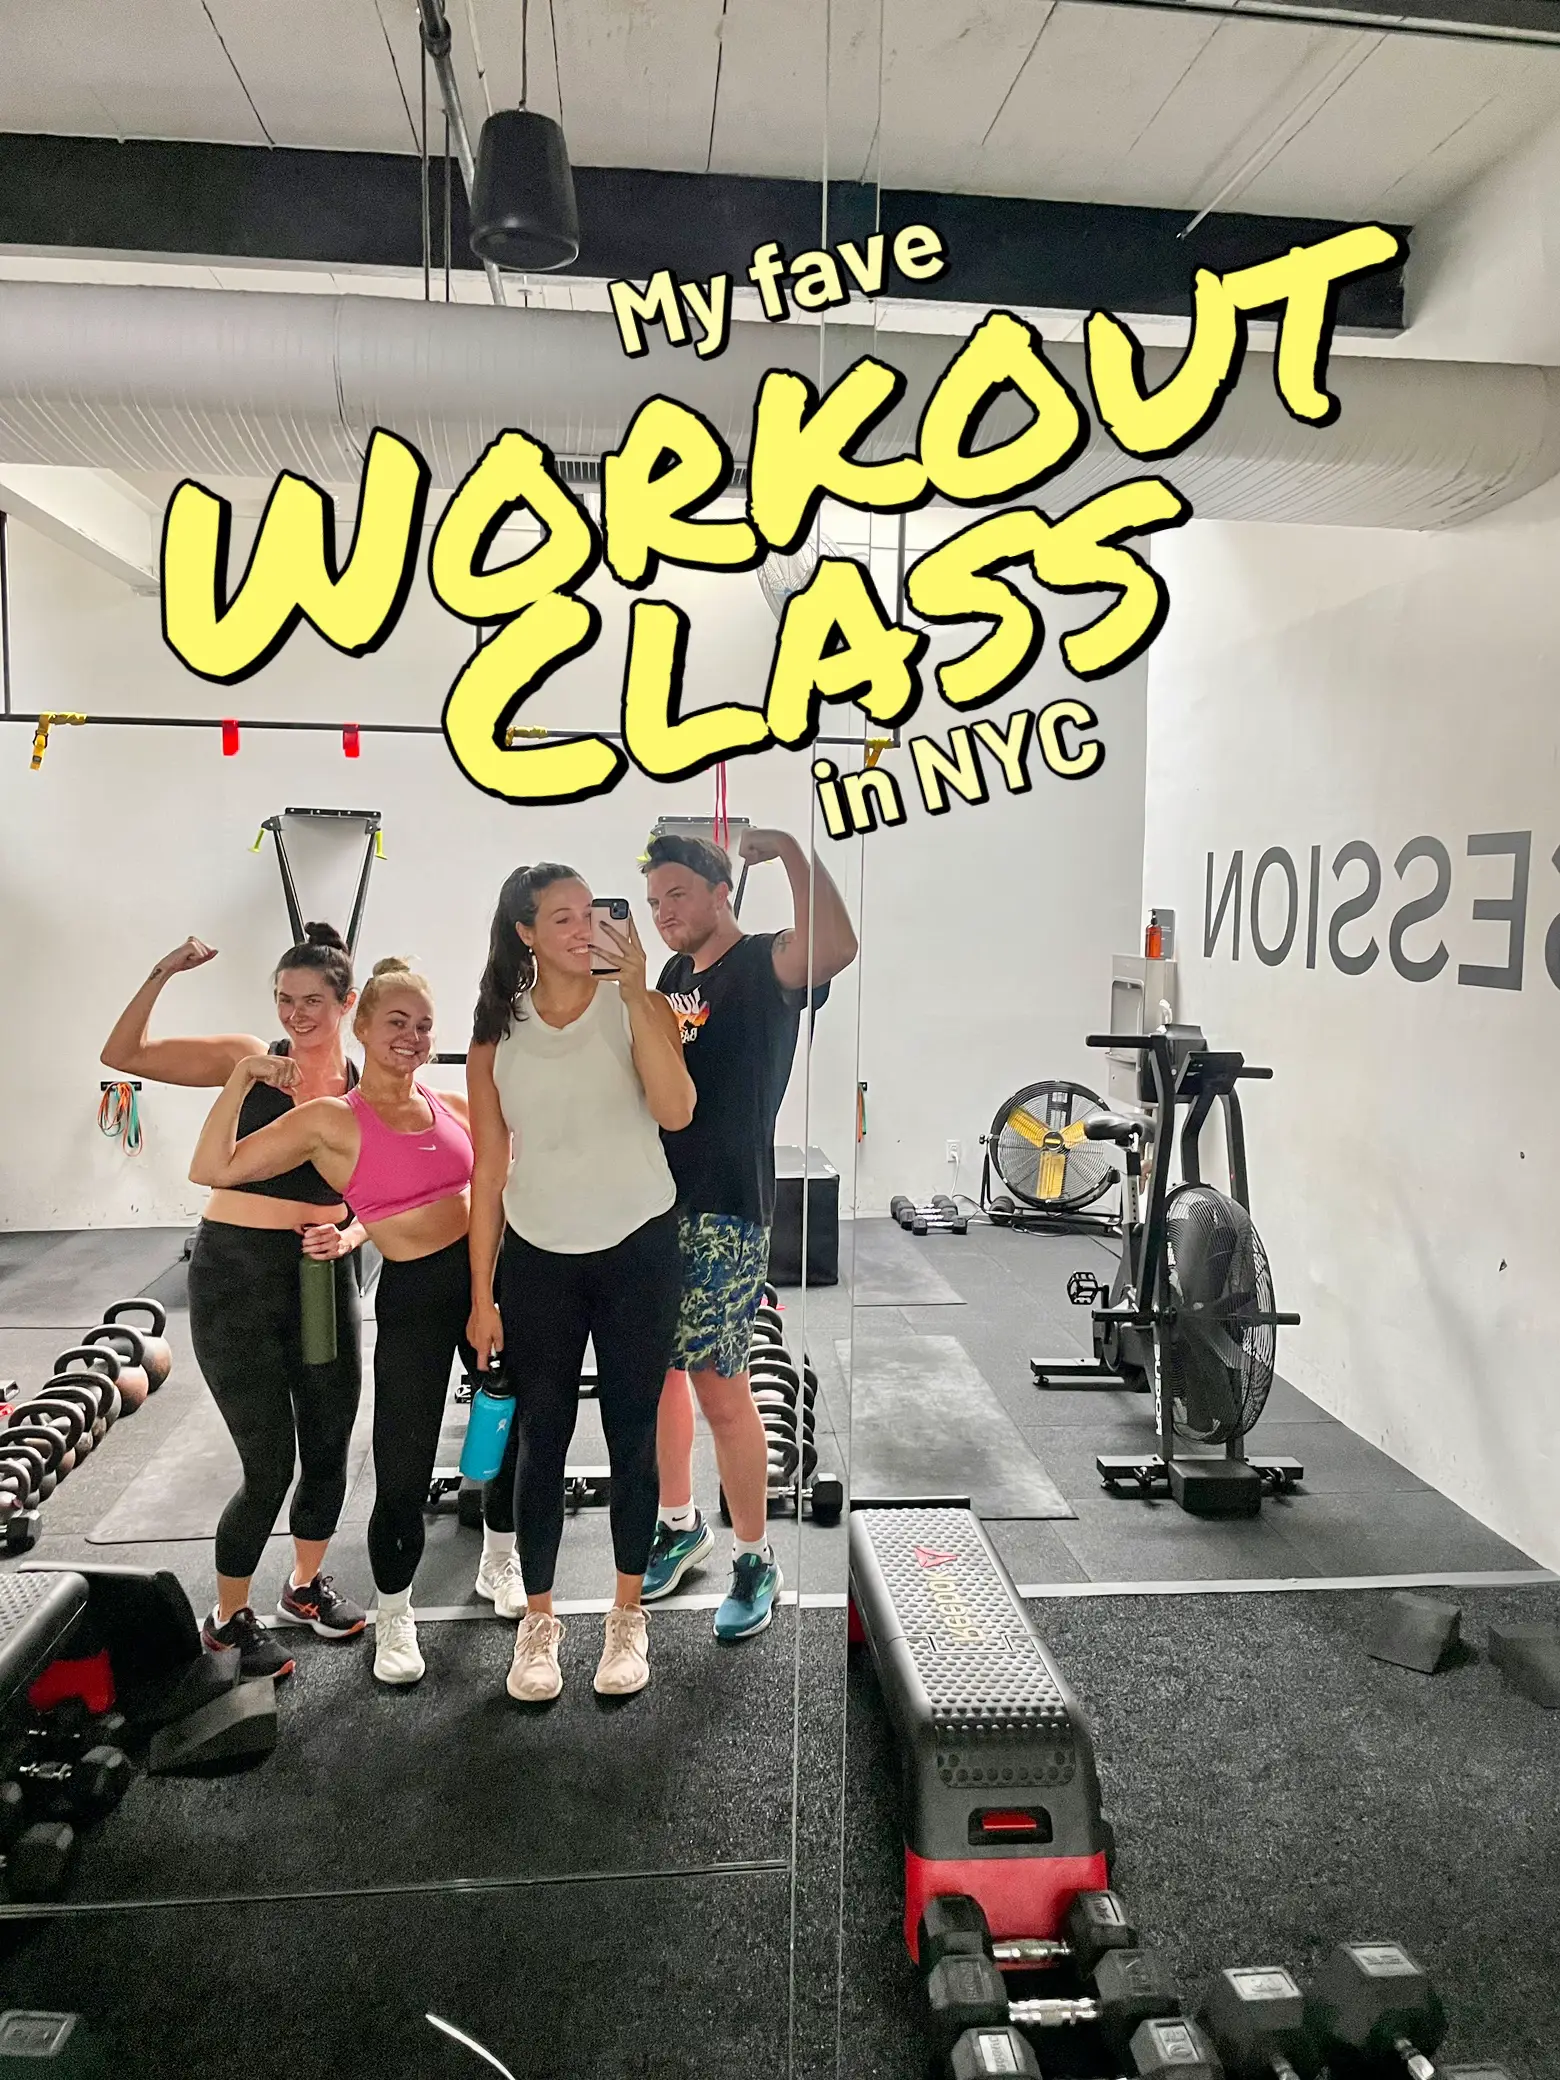 Anytime Fitness - Tampa - W Kennedy Blvd: Read Reviews and Book Classes on  ClassPass